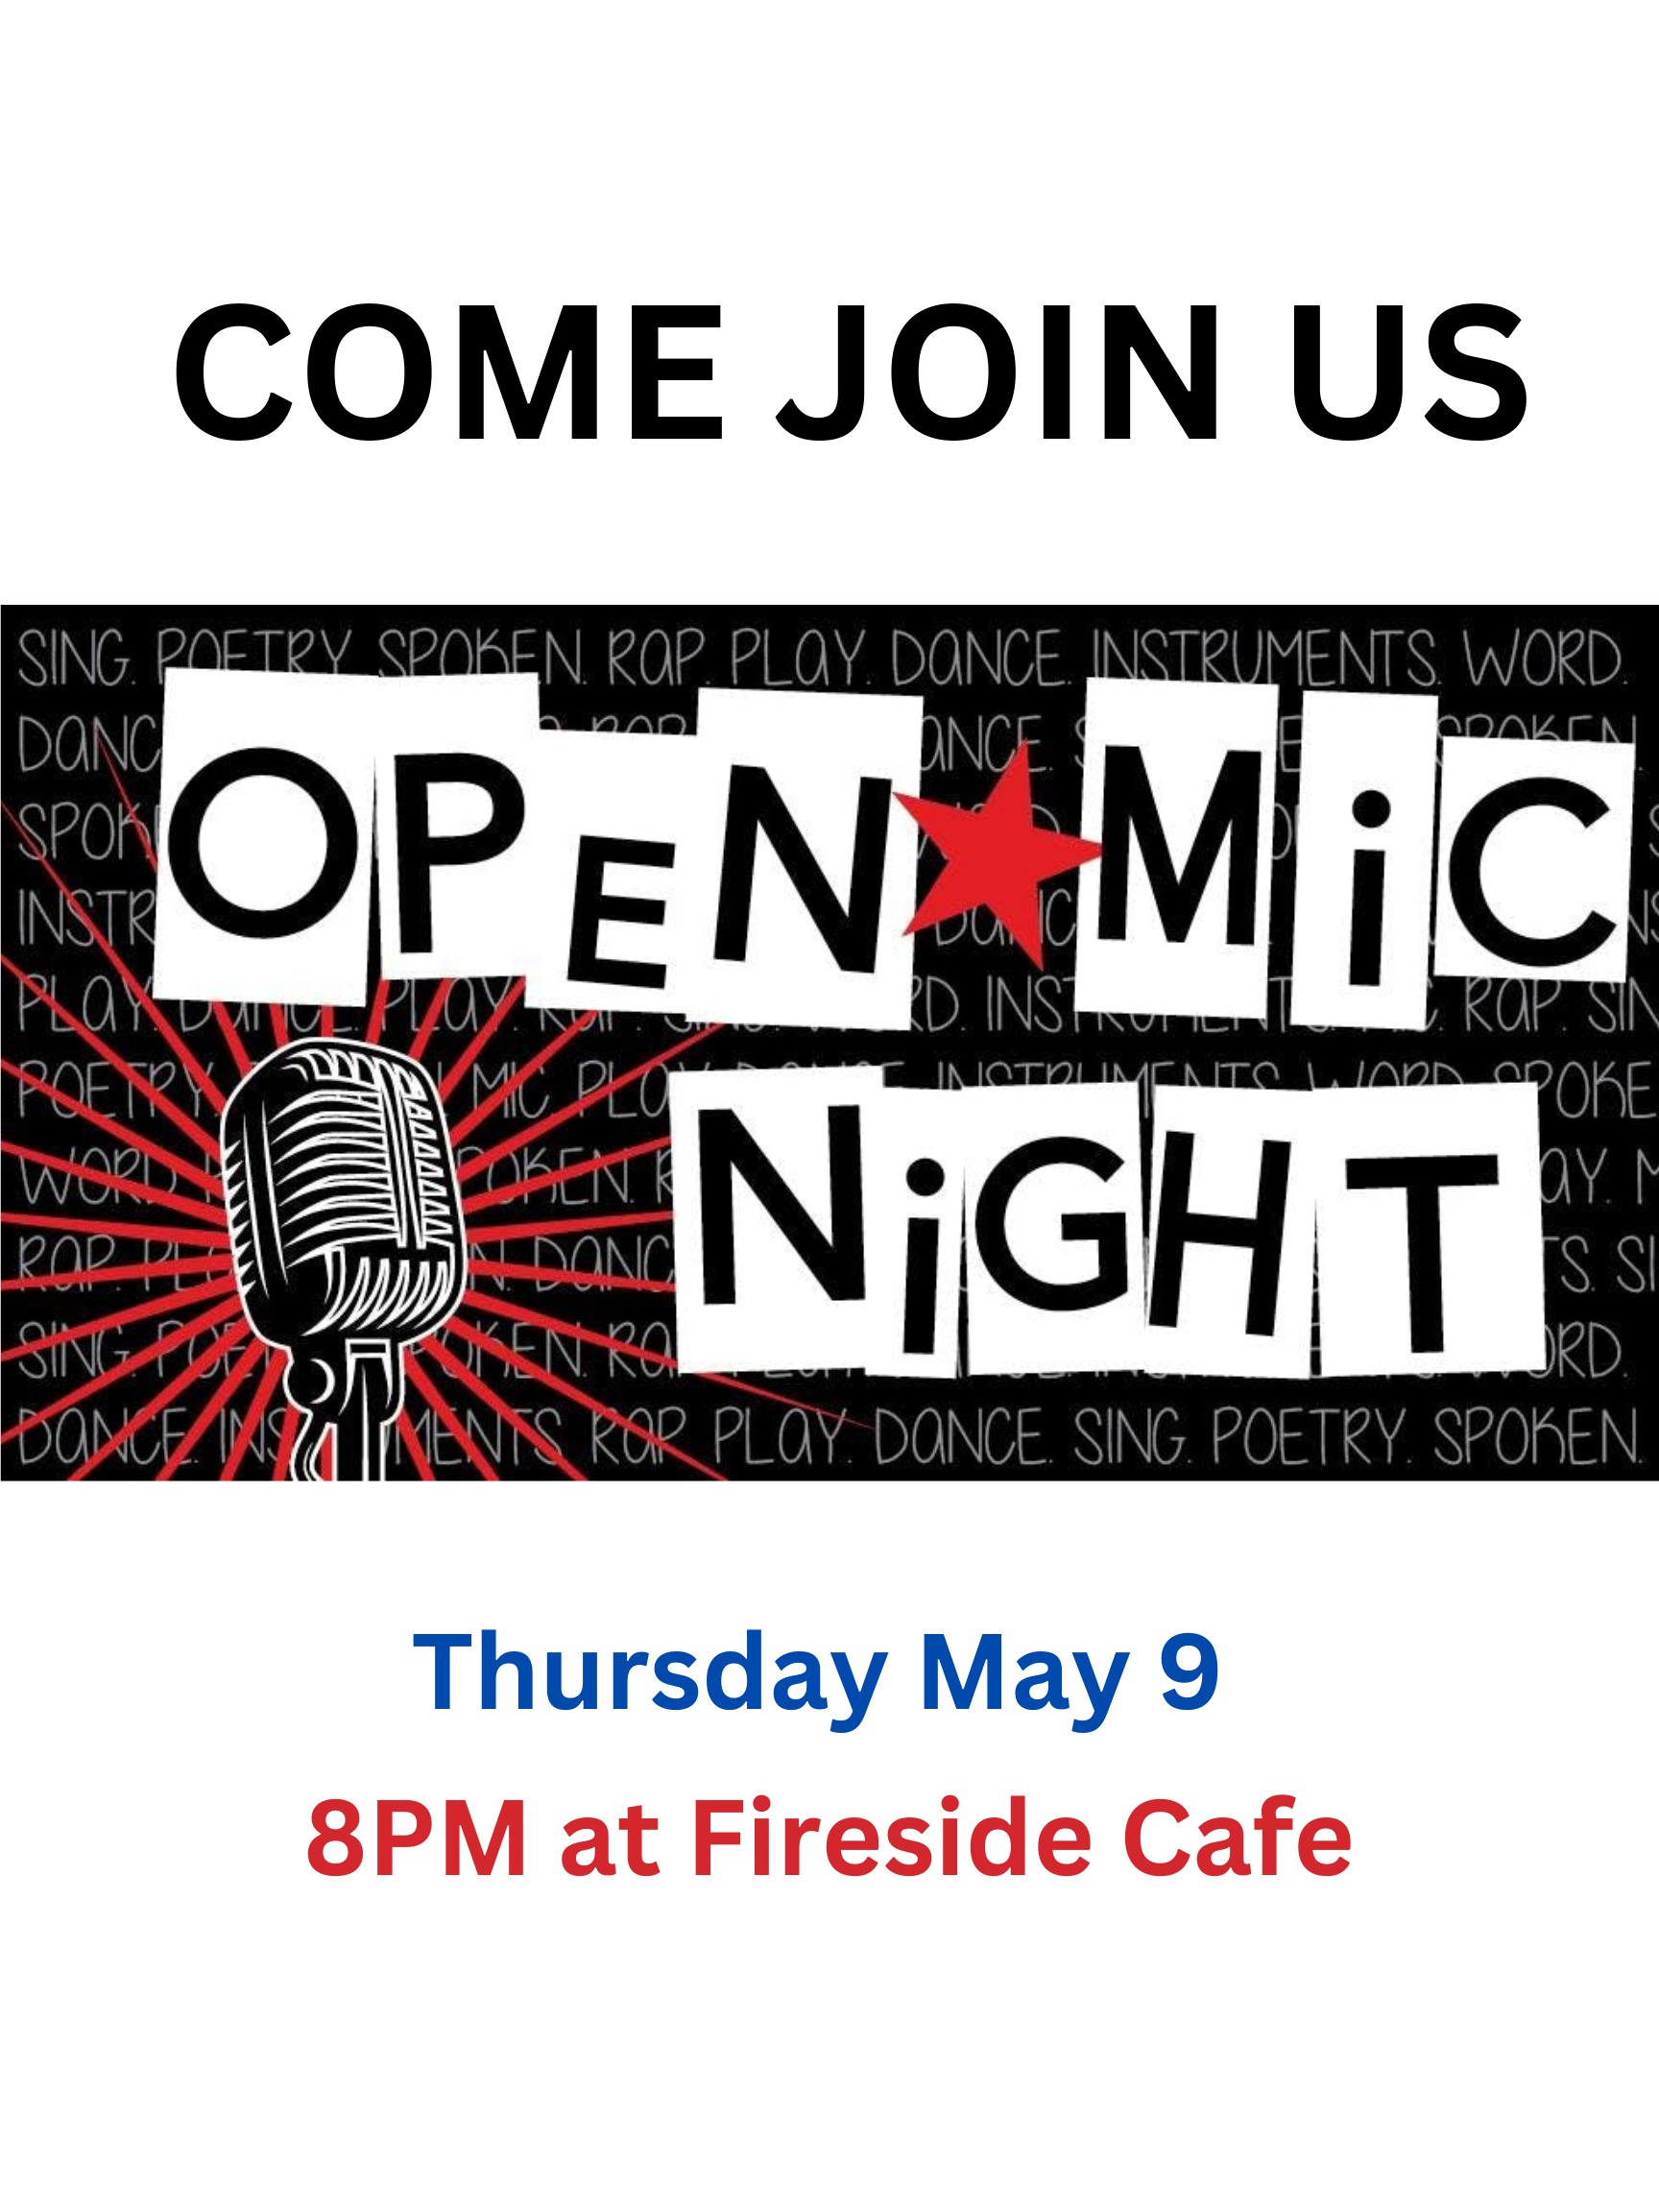 Lose some of the final's week jitters at this Thursday's Open Mic Night!

Thursday, May 9th

8 pm | Fireside Cafe